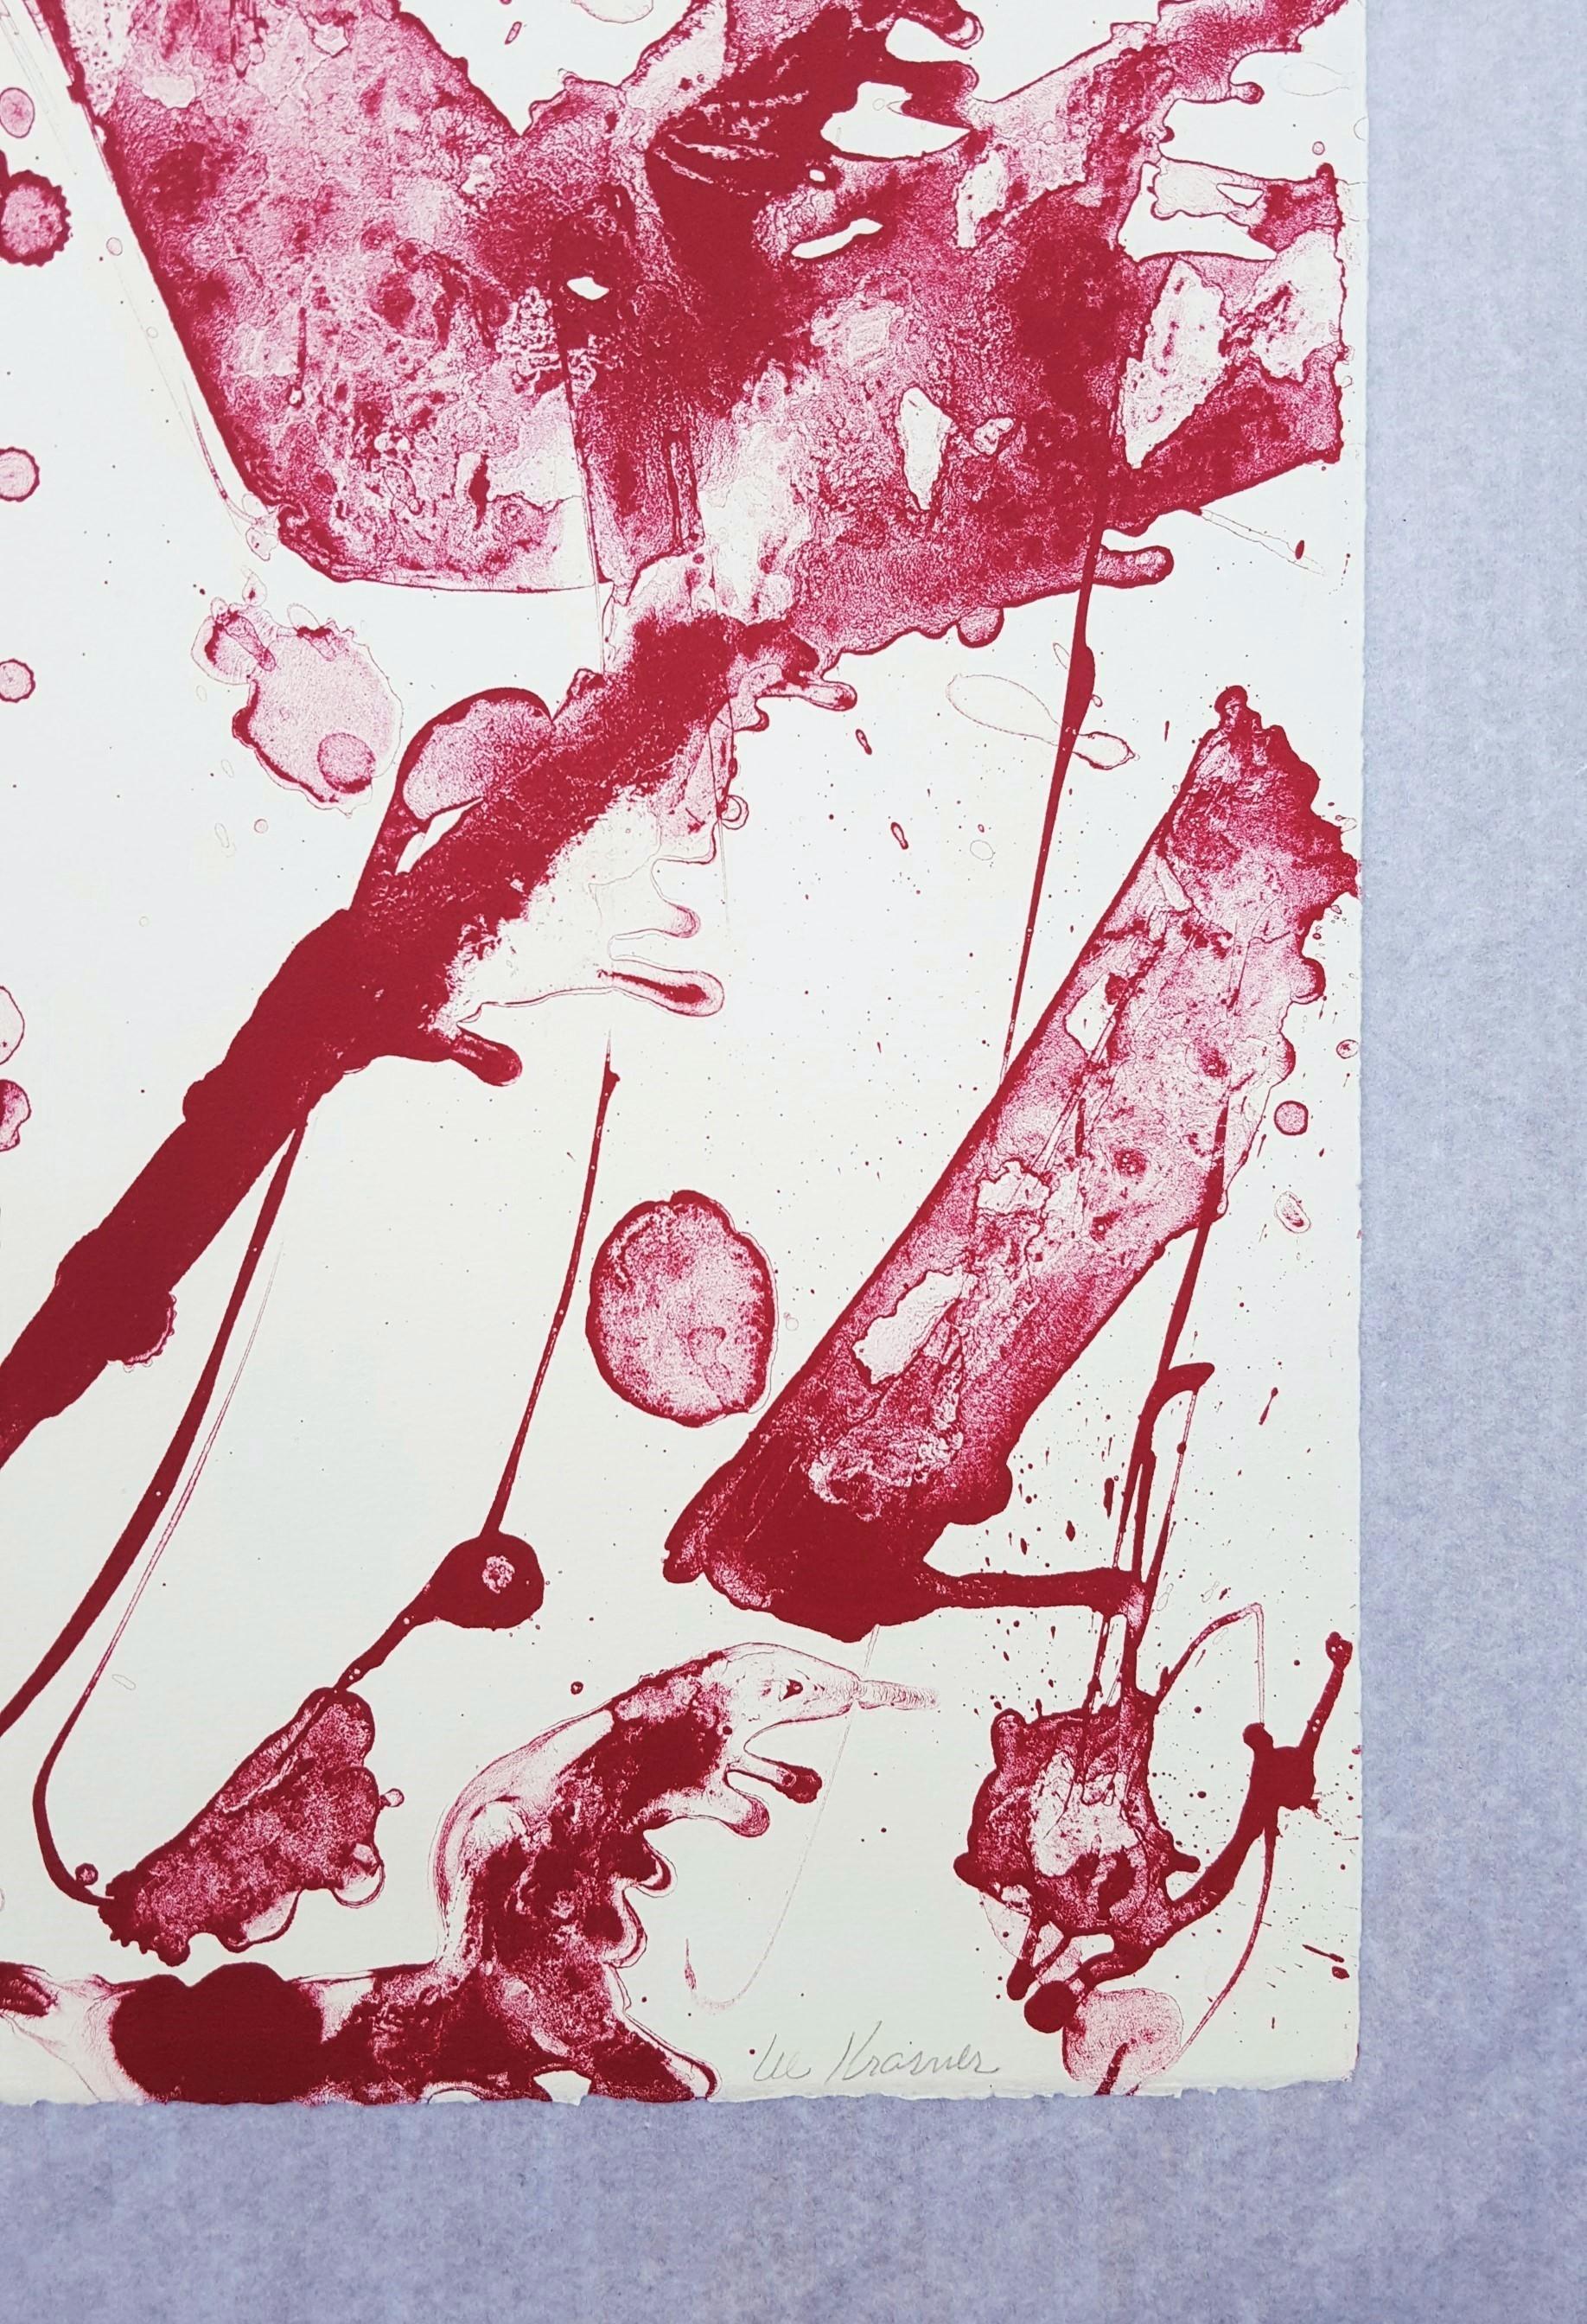 Pink Stone (also called Rose Stone) - Abstract Expressionist Print by Lee Krasner